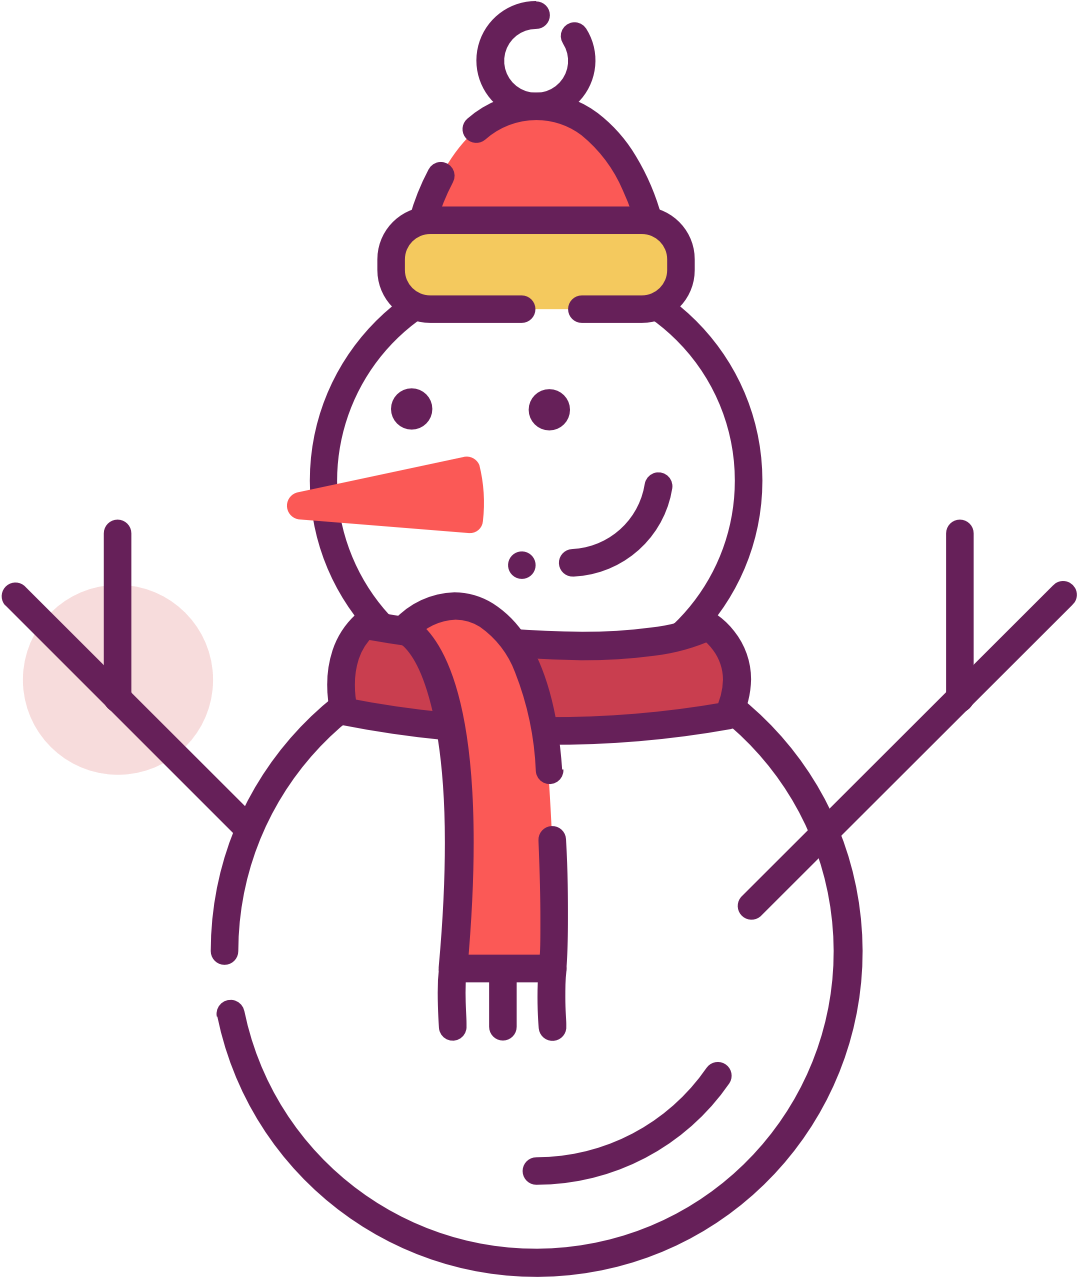 Snowman With Hat And Scarf Free Downloadable Clip Art - Snowman With Hat And Scarf Free Downloadable Clip Art (1920x1280)